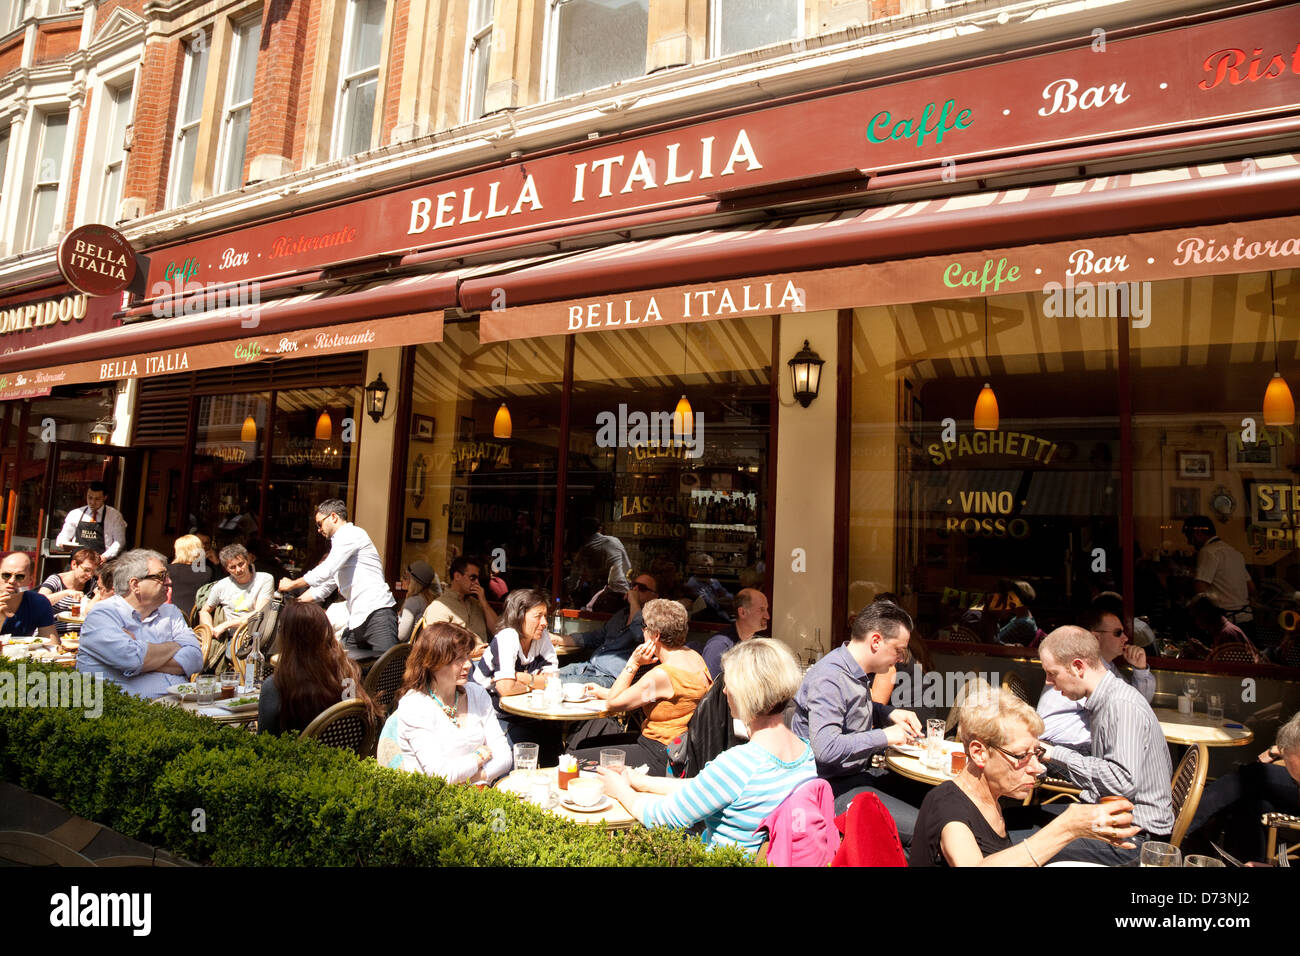 Bella Italia italian restaurant, people eating outside, Leicester Square, central London UK Stock Photo